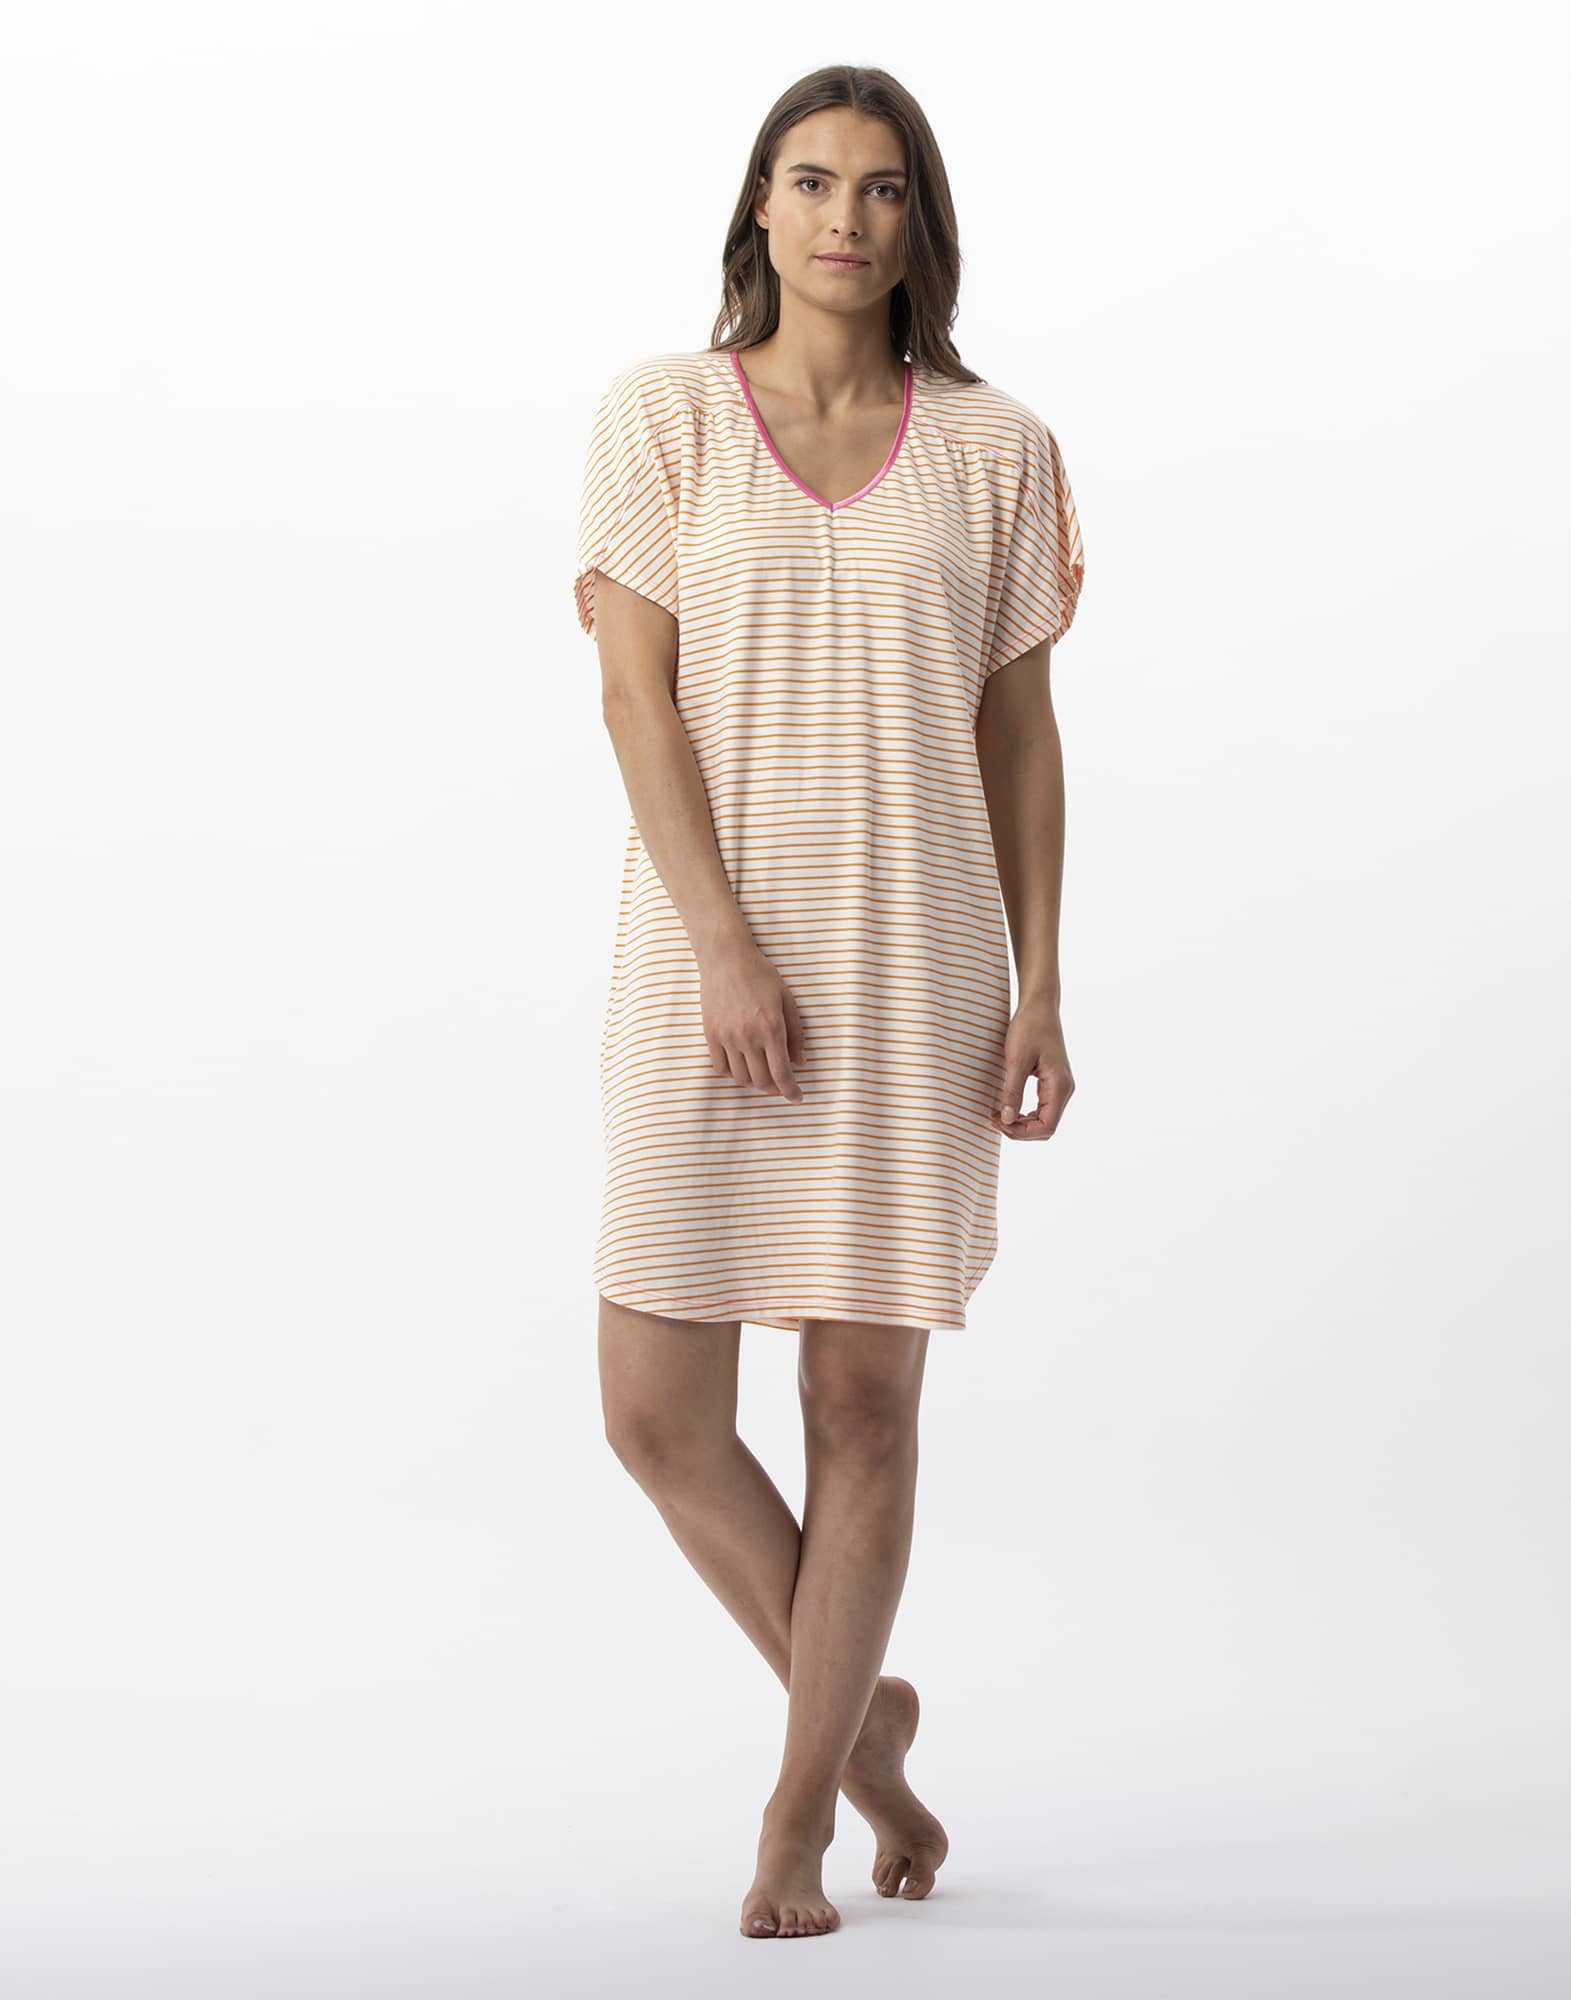 Striped nightshirt in cotton and modal FRUTTI 701 tangerine | Lingerie le Chat